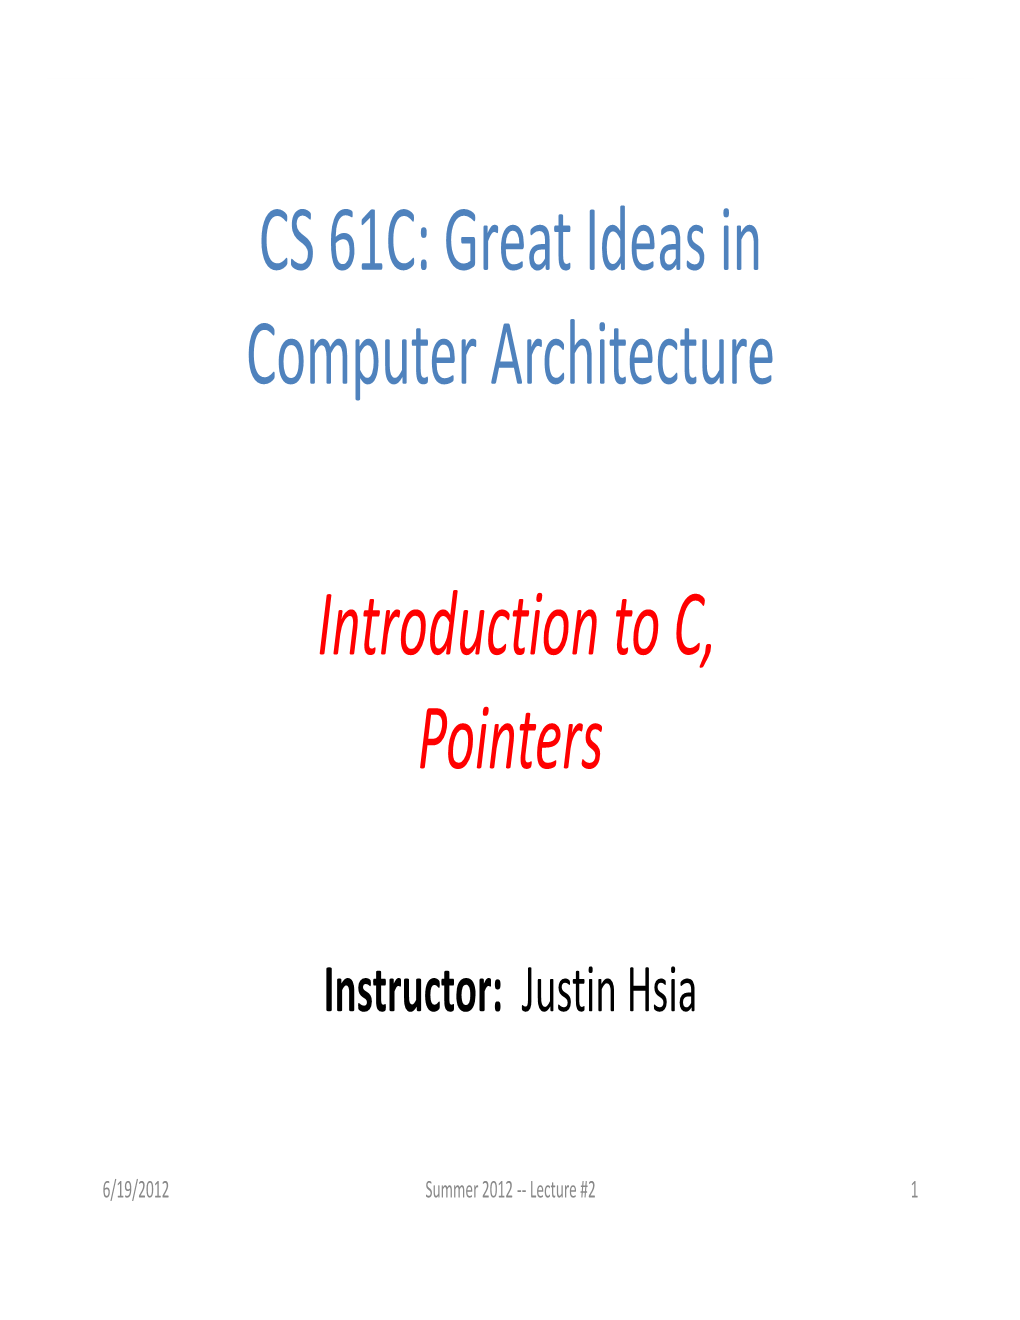 CS 61C: Great Ideas in Computer Architecture Introduction to C, Pointers